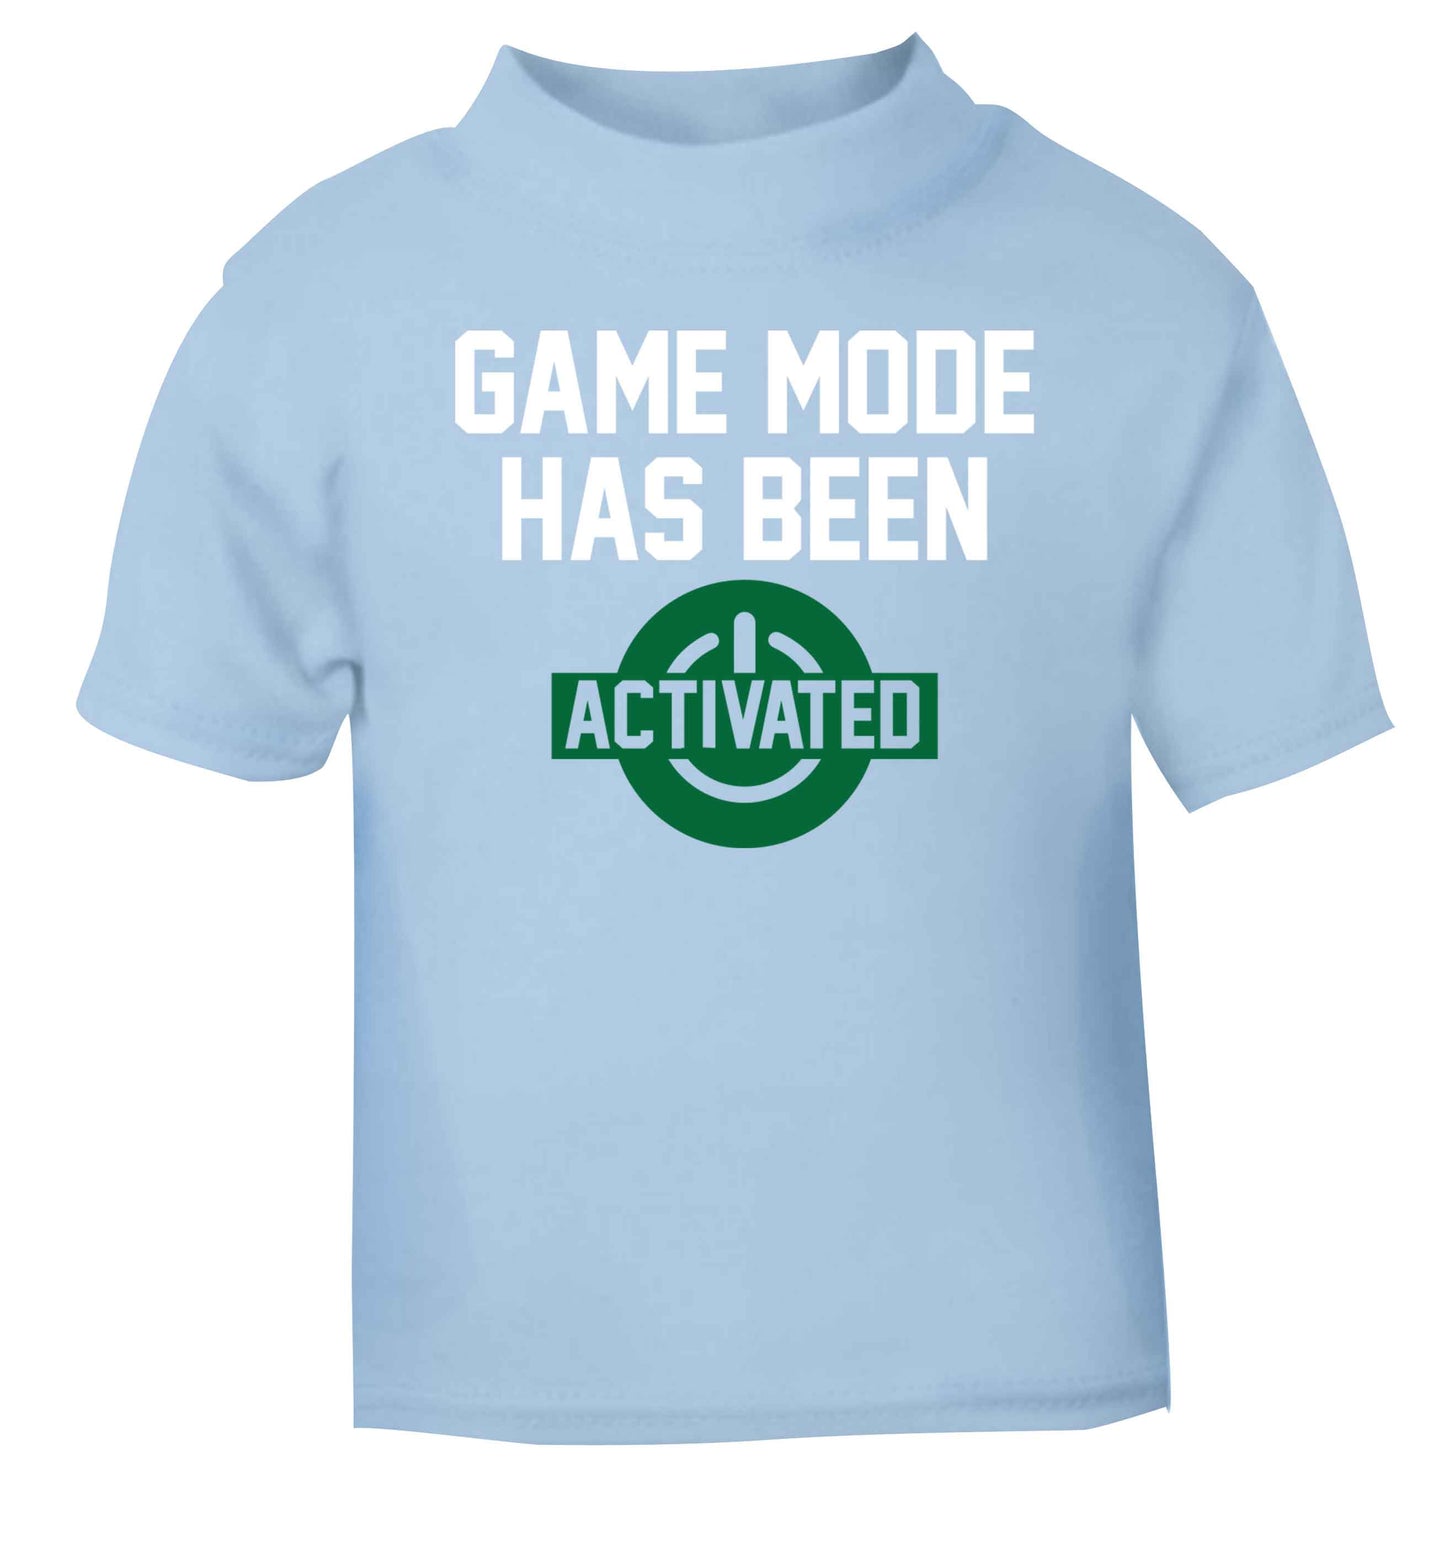 Game mode has been activated light blue baby toddler Tshirt 2 Years